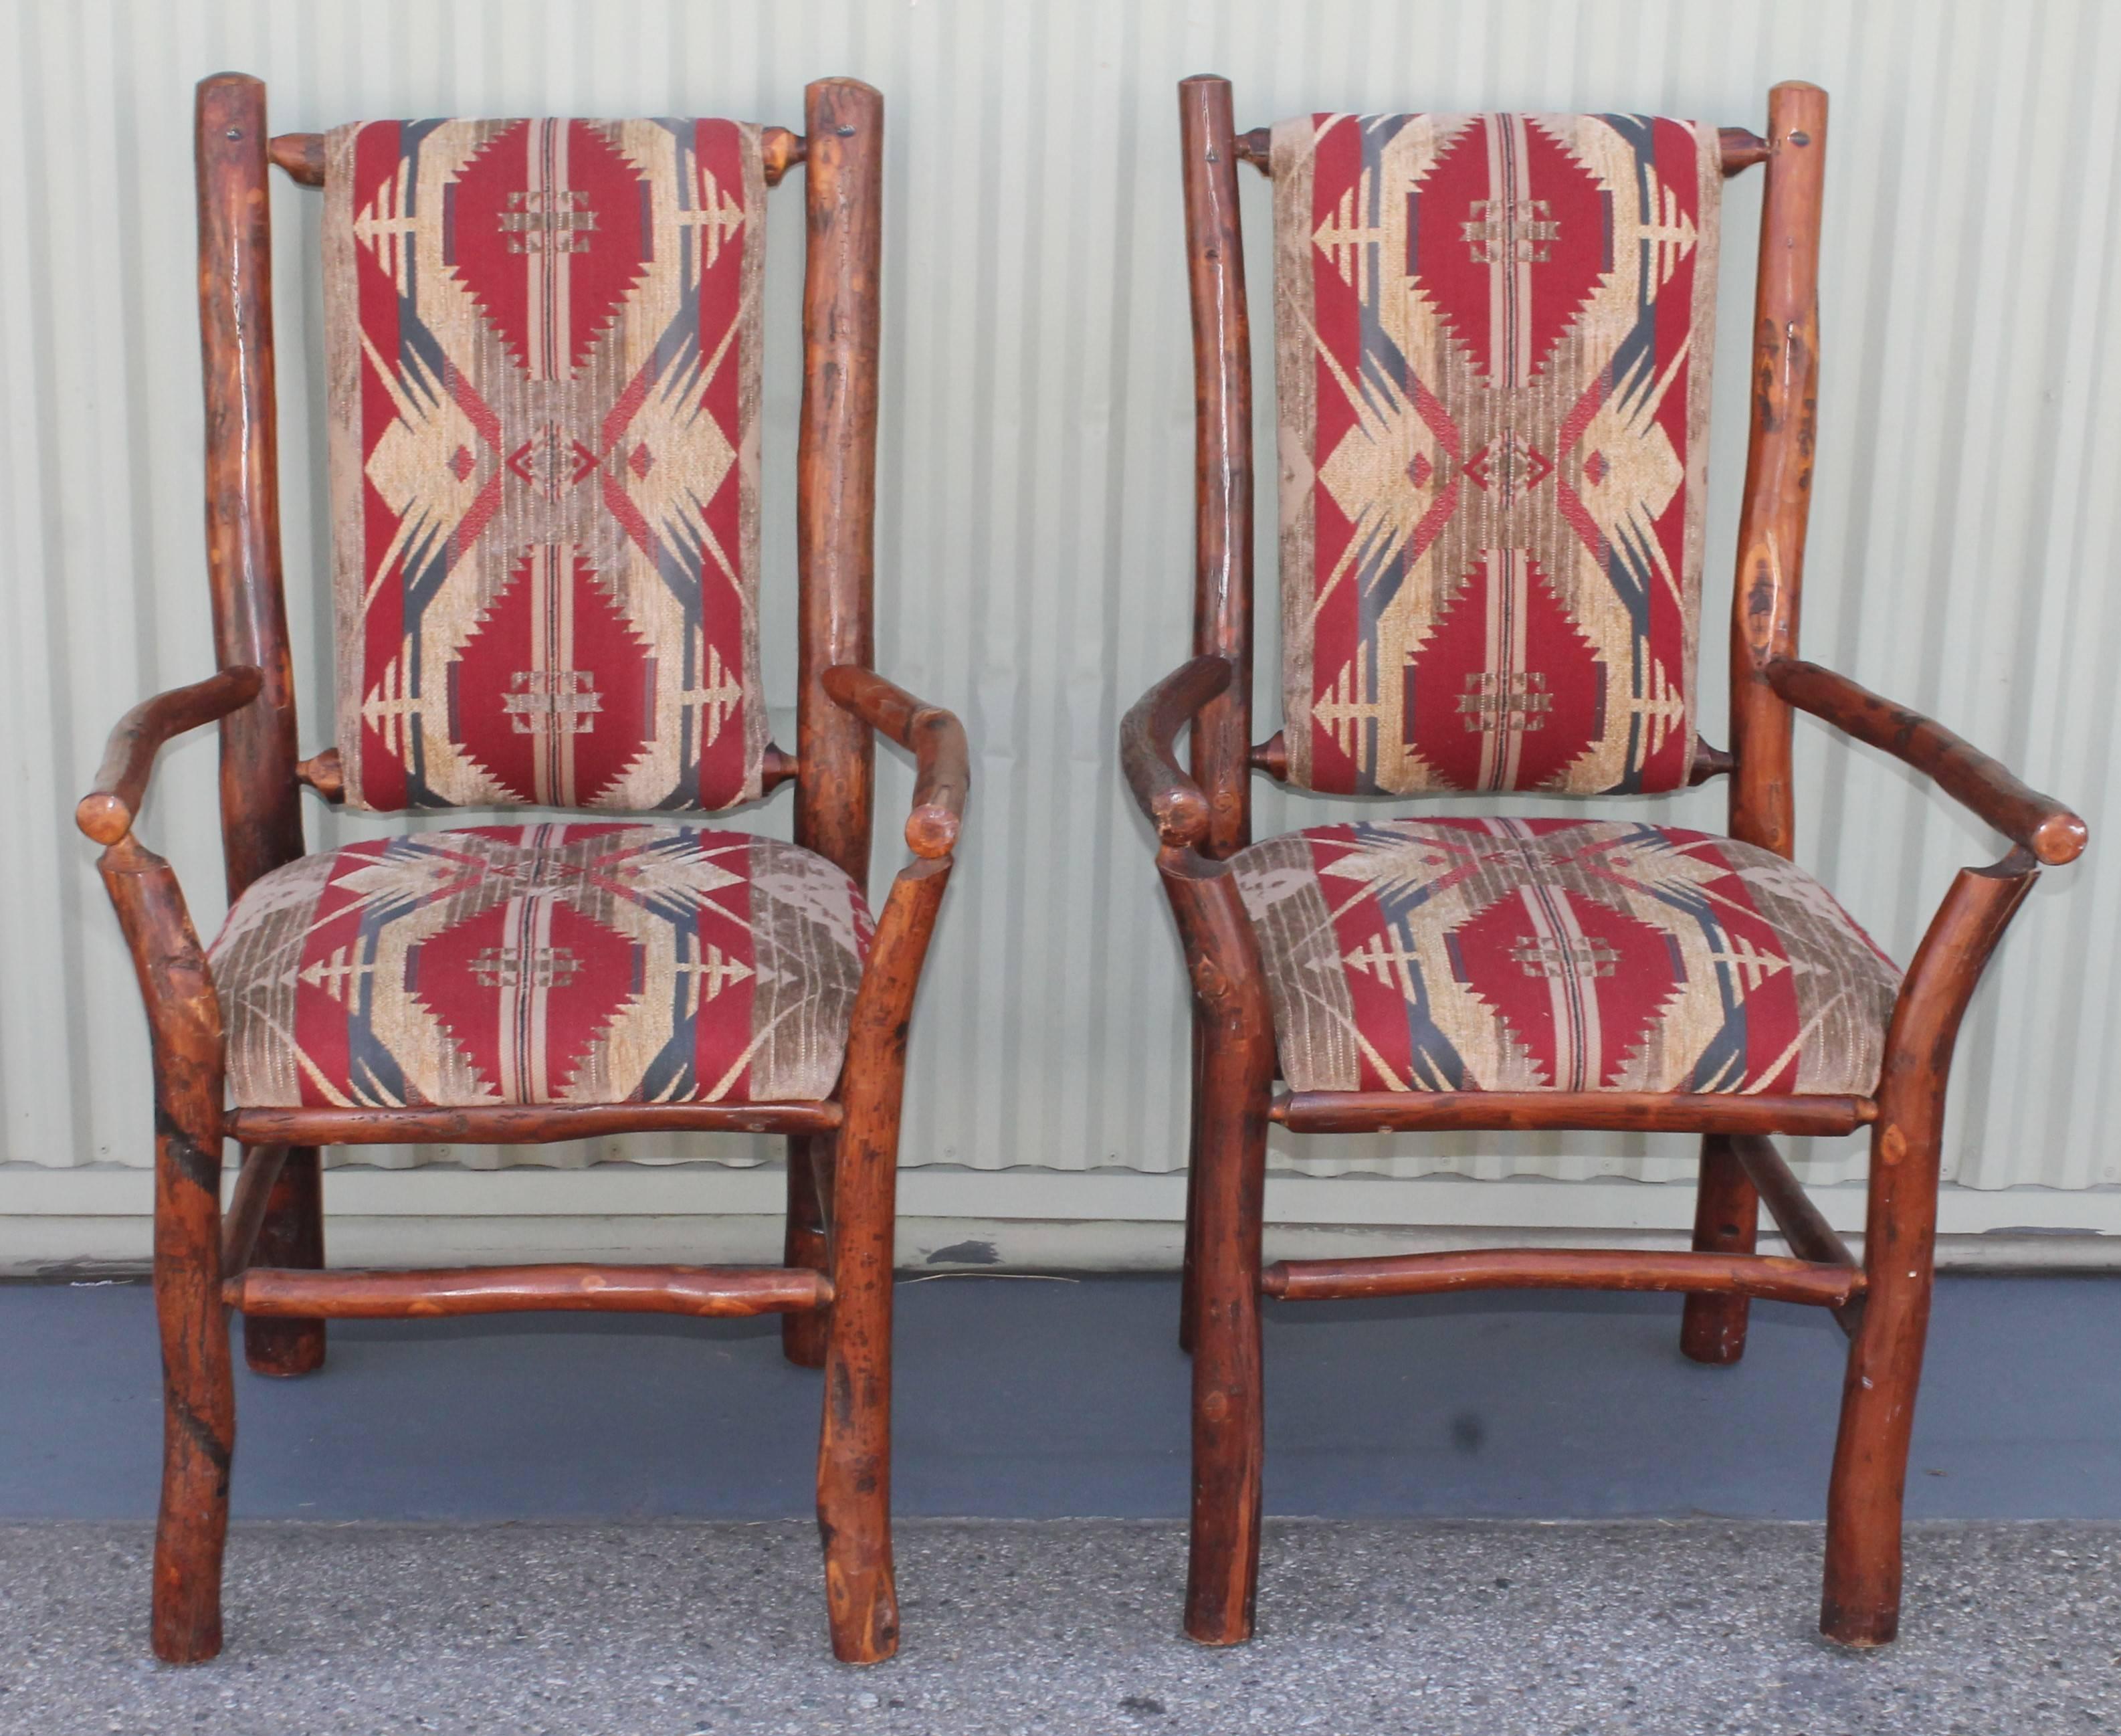 This pair of old hickory arm chairs are in good and sturdy condition. They are newly upholstered western vintage Indian design fabric. Very unusual chairs.